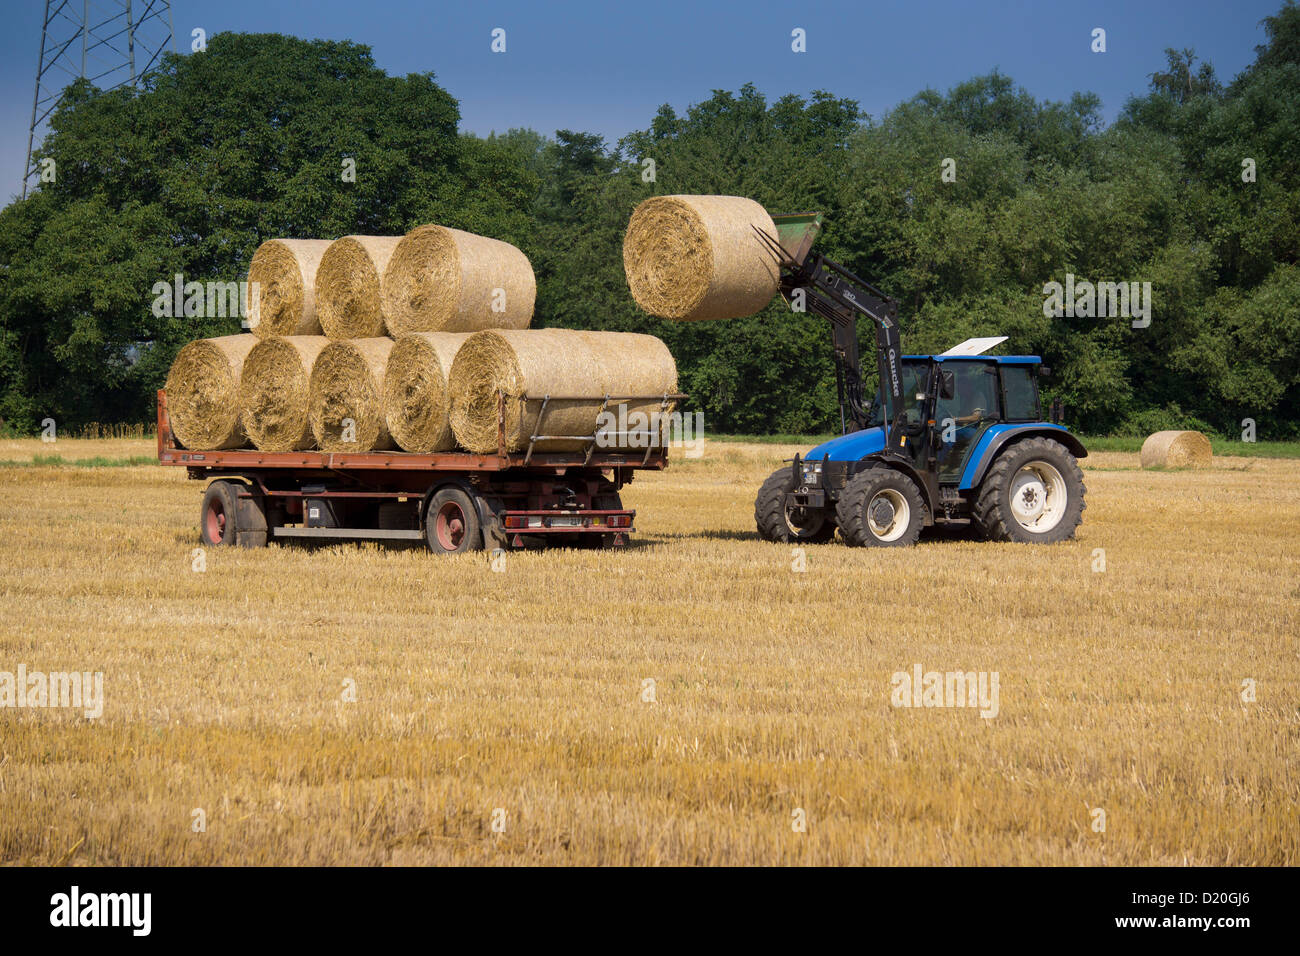 Farmer with a tractor loading a trailer with straw bales, Hanau, Hesse, Germany, Europe Stock Photo